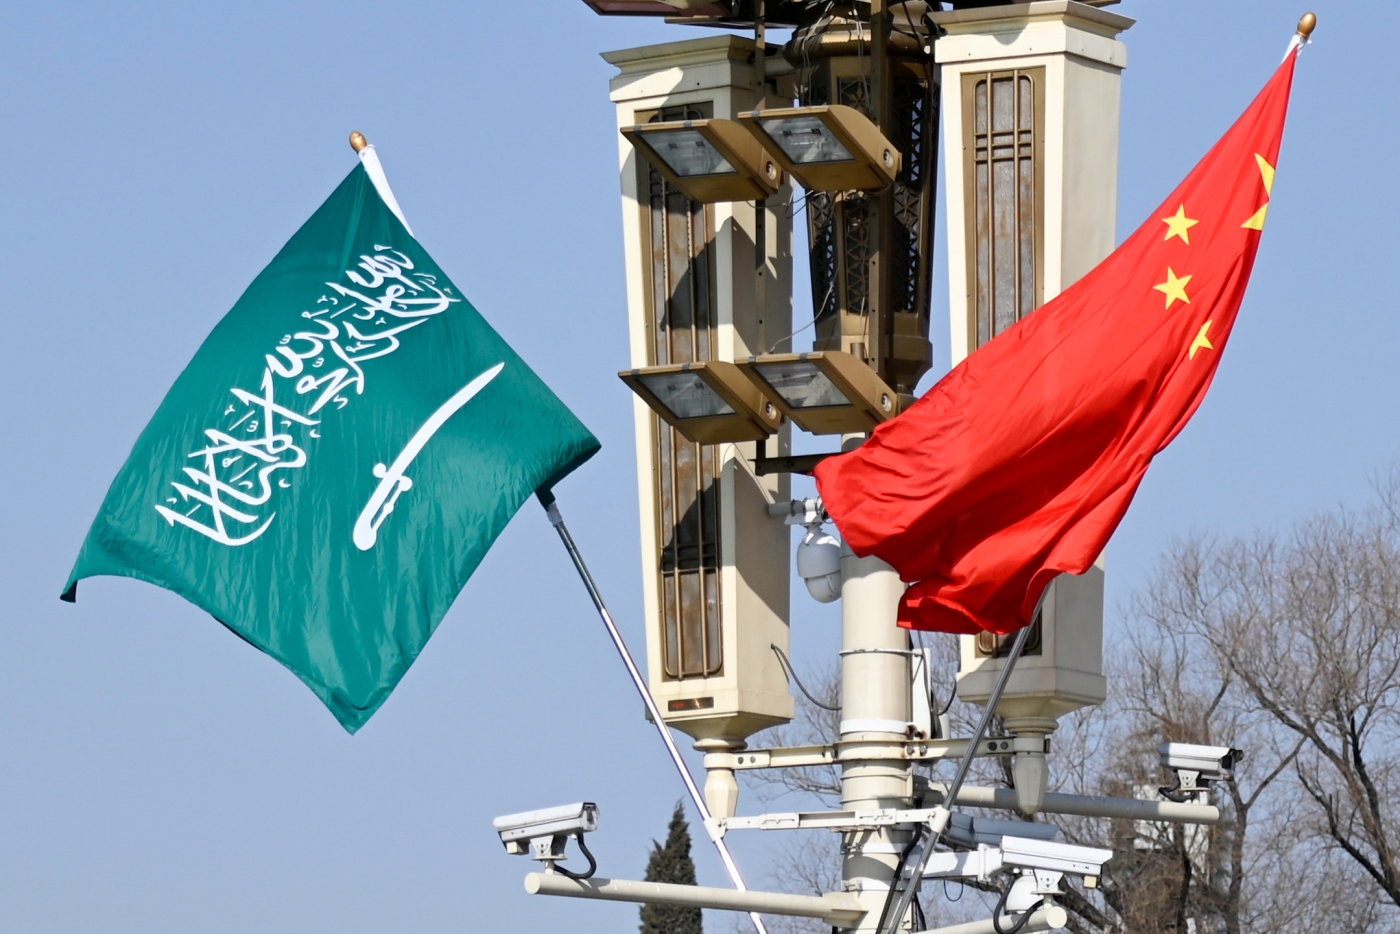 Riyadh inked deals with Beijing in 2012 and 2017 for cooperation on a number of nuclear energy projects.